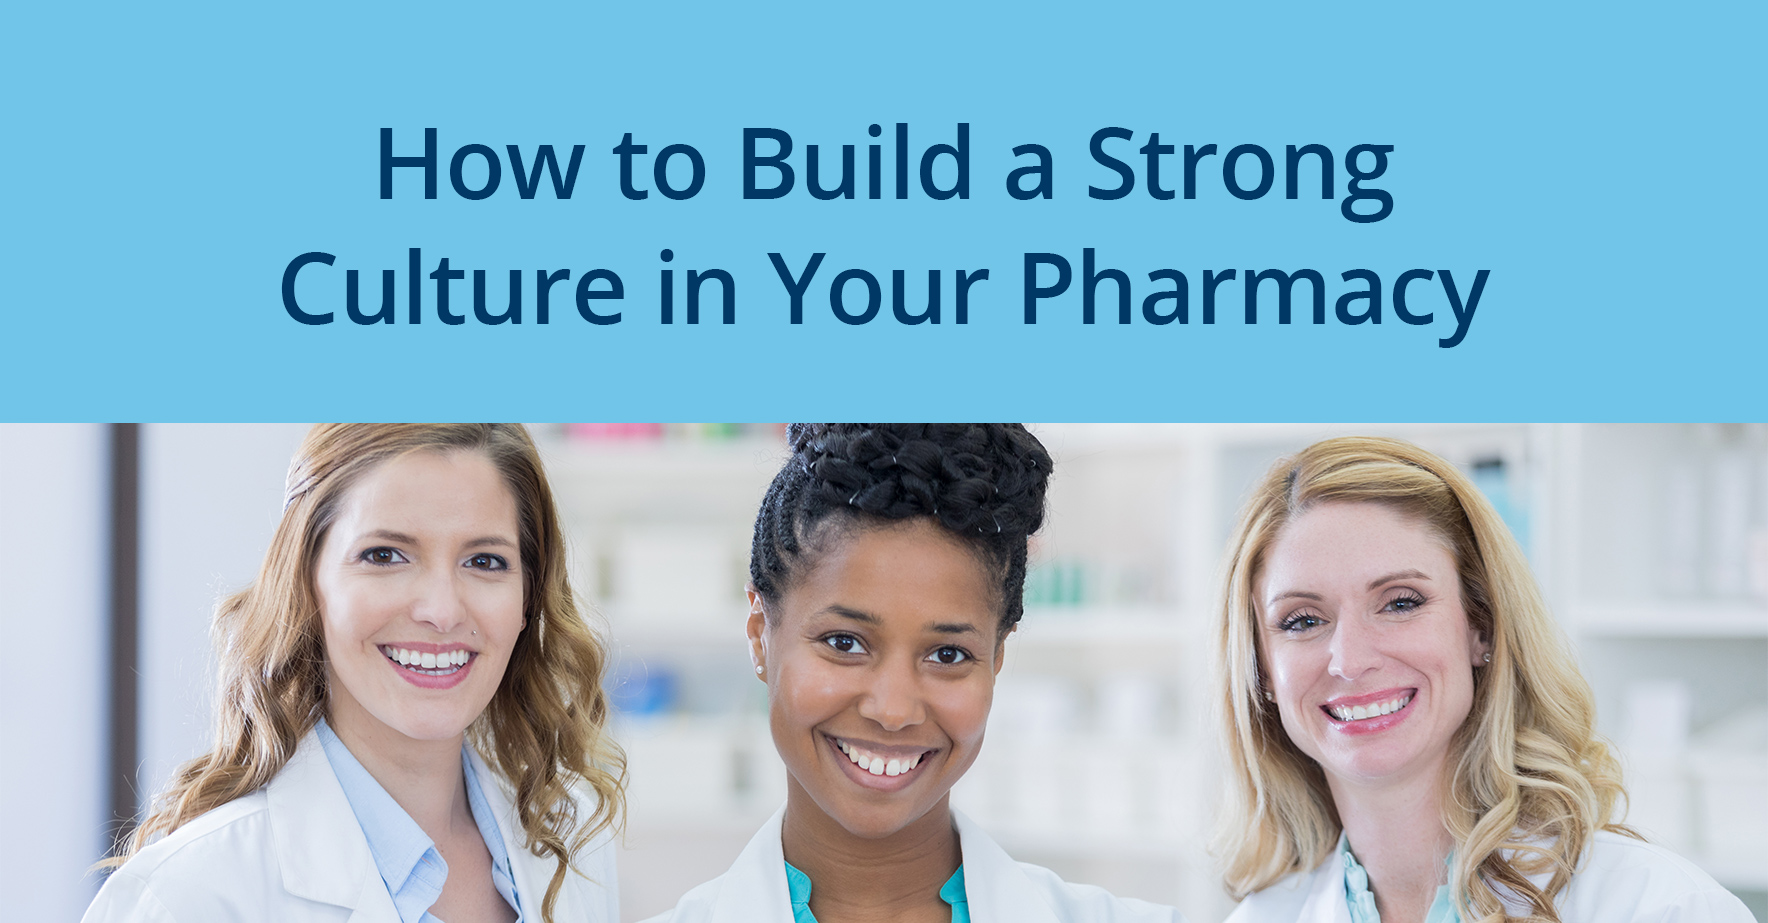 How_to_Build_a_Strong_Culture_in_Your_Pharmacy.jpg